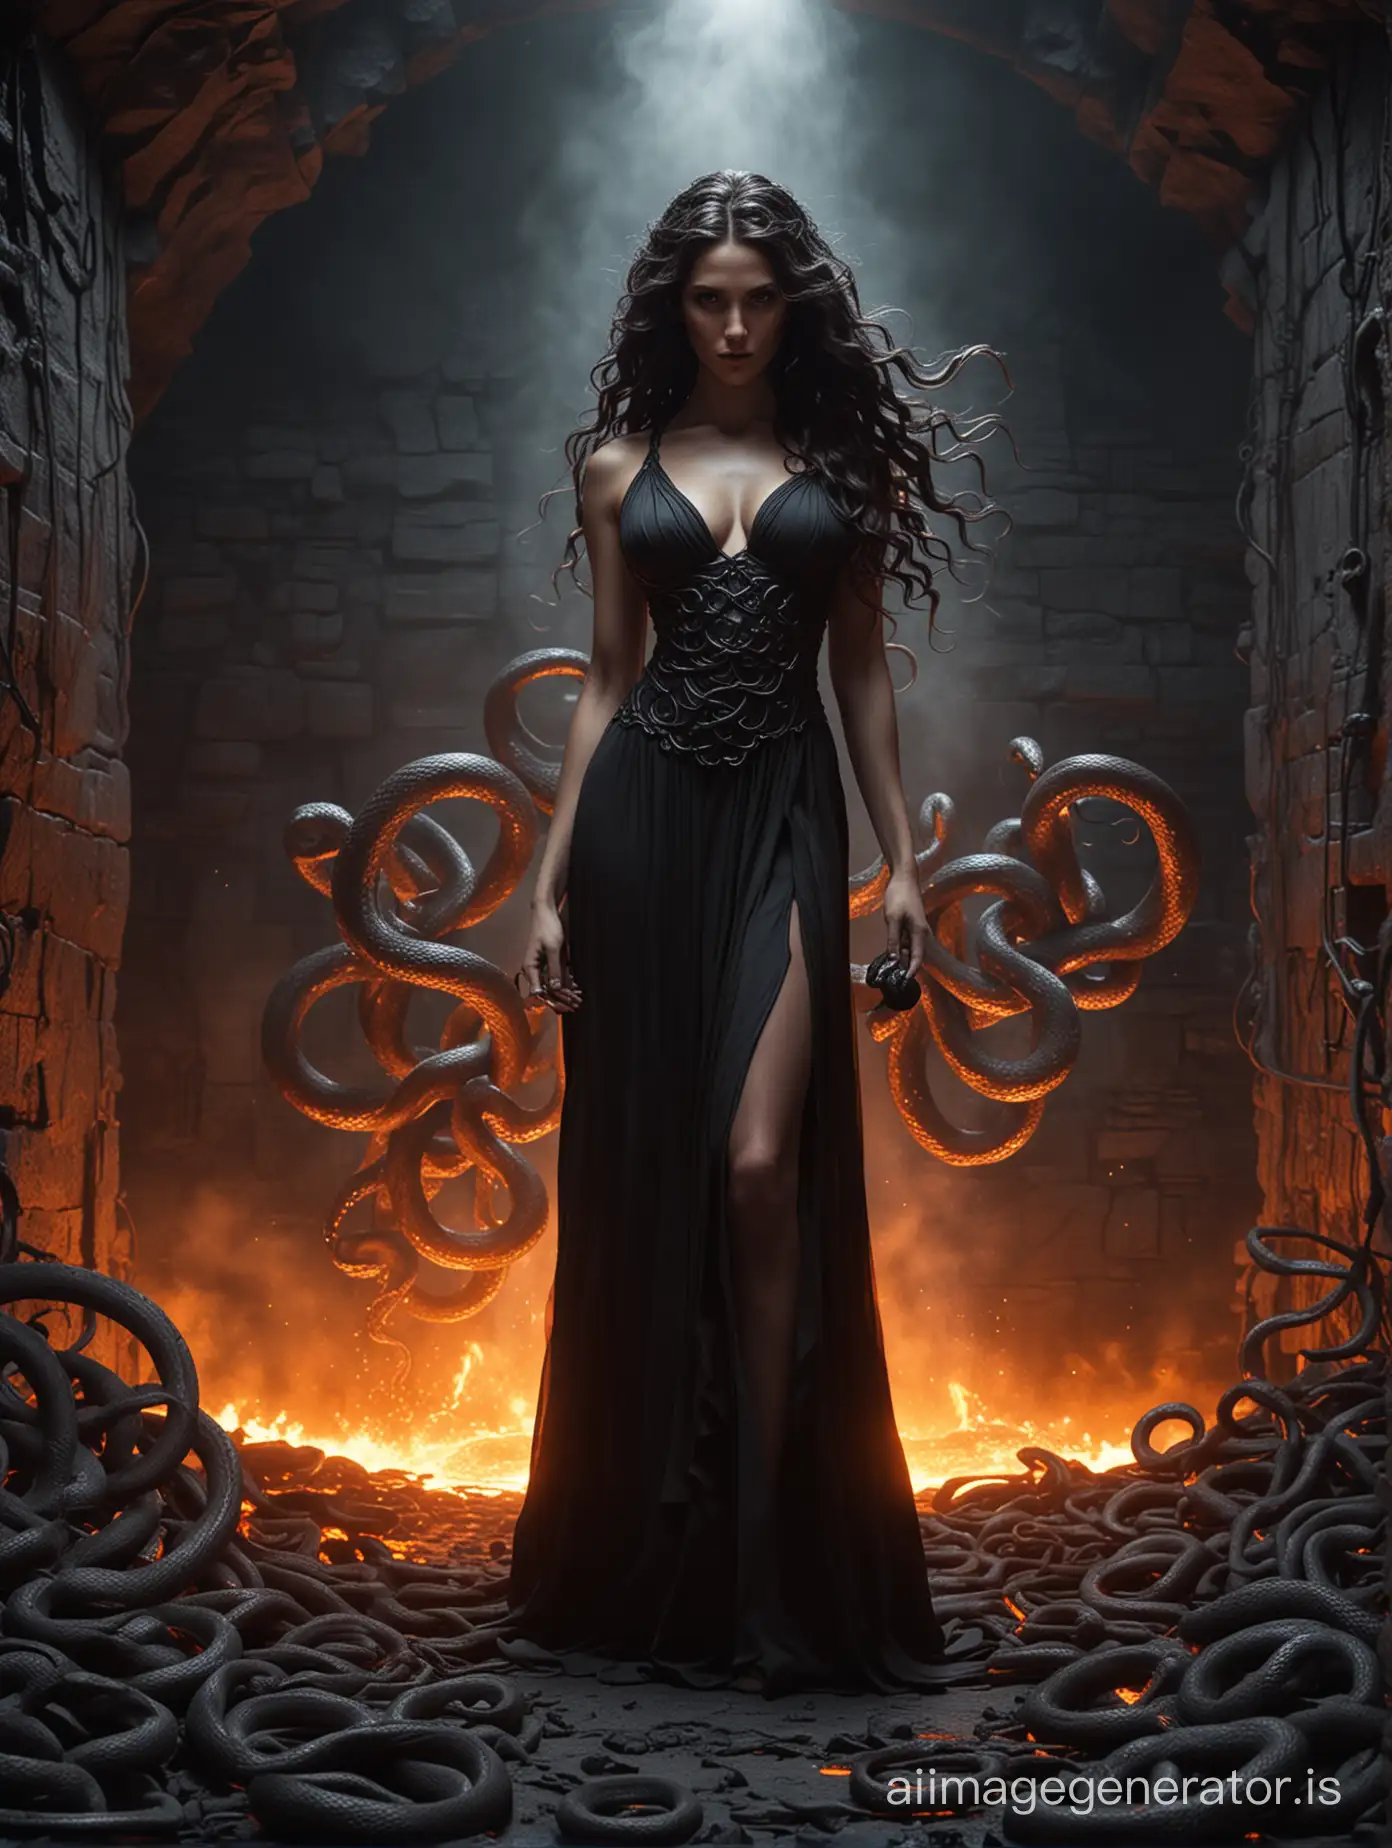 mythological medusa. long black dress. snakes in hair. glow from lava in a smelter iron forge in the background underground dungeon